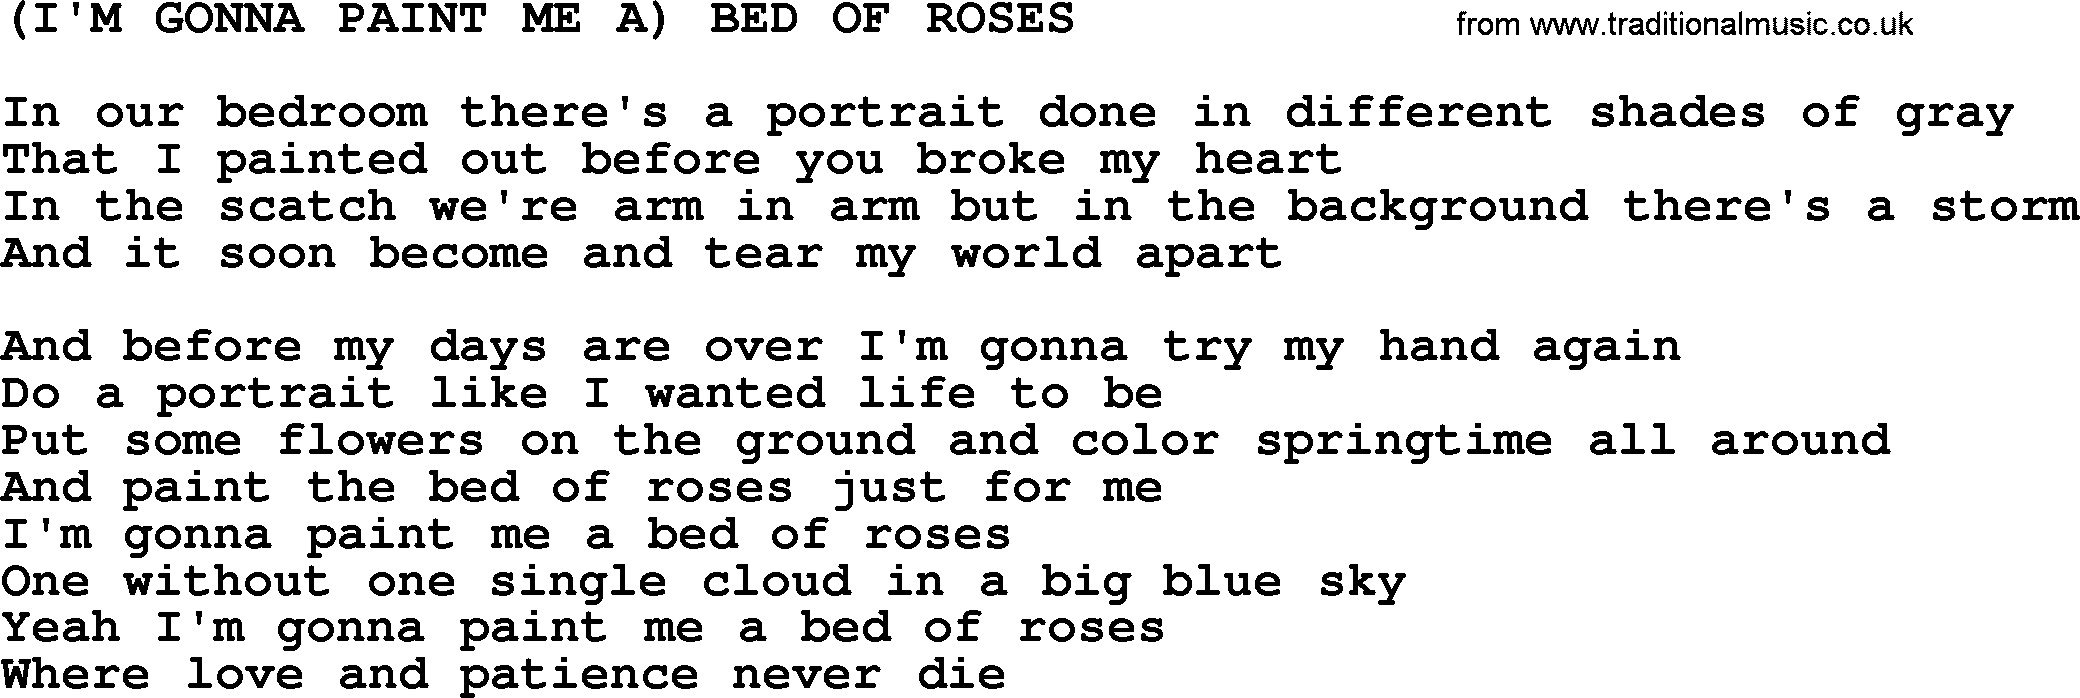 Merle Haggard song: I'm Gonna Paint Me A Bed Of Roses1, lyrics.